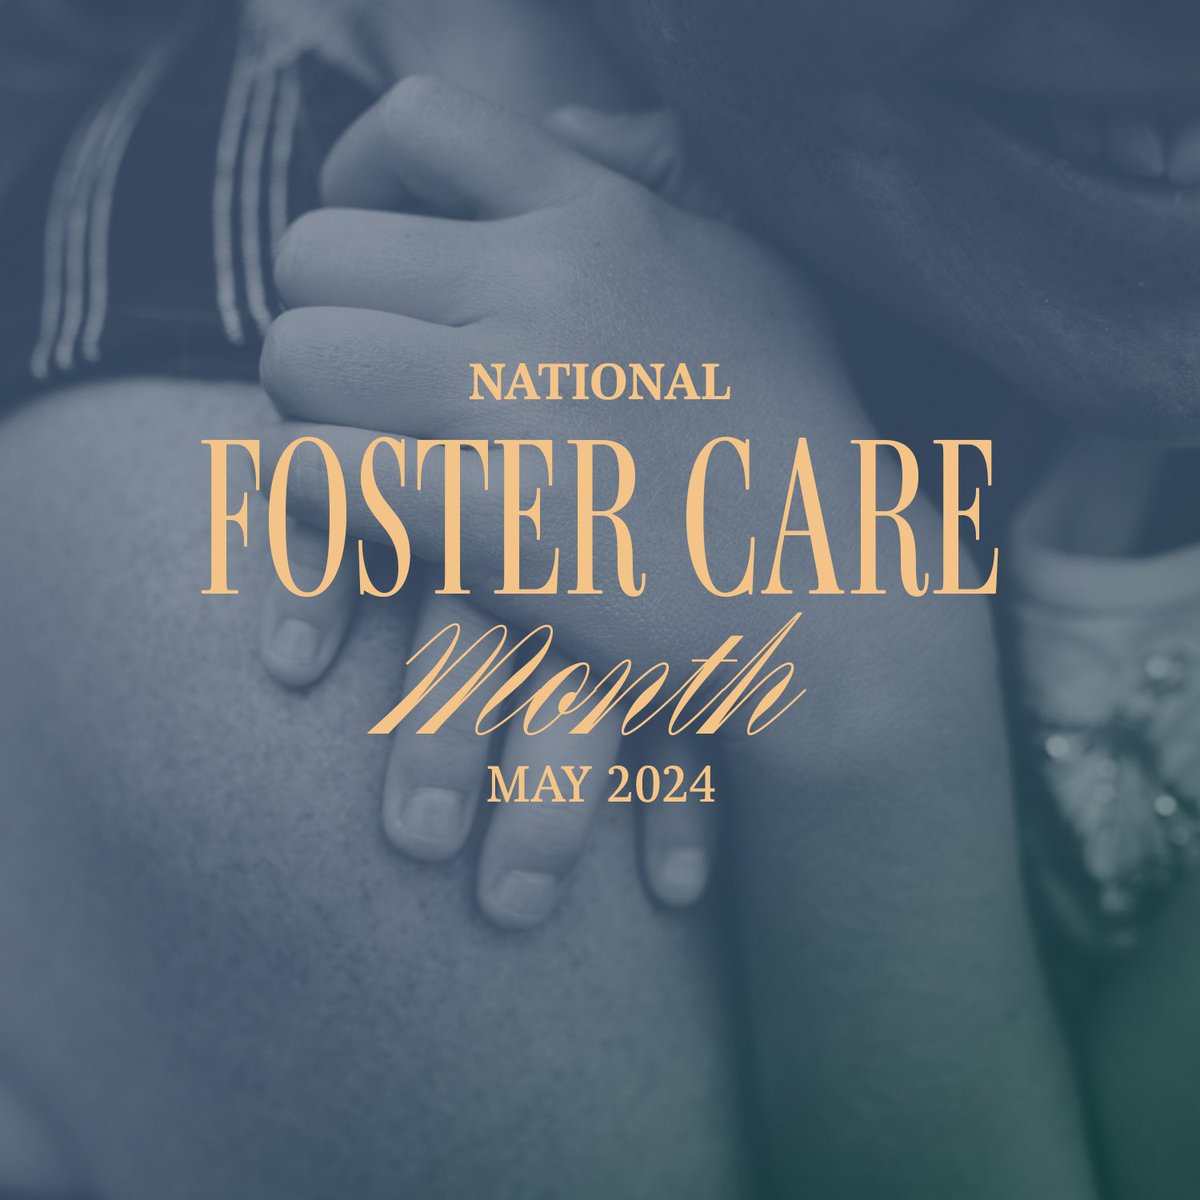 President Ronald Reagan began National Foster Care Month in 1988 — Every May, we take the opportunity to recognize the needs of the children and young people in foster care.